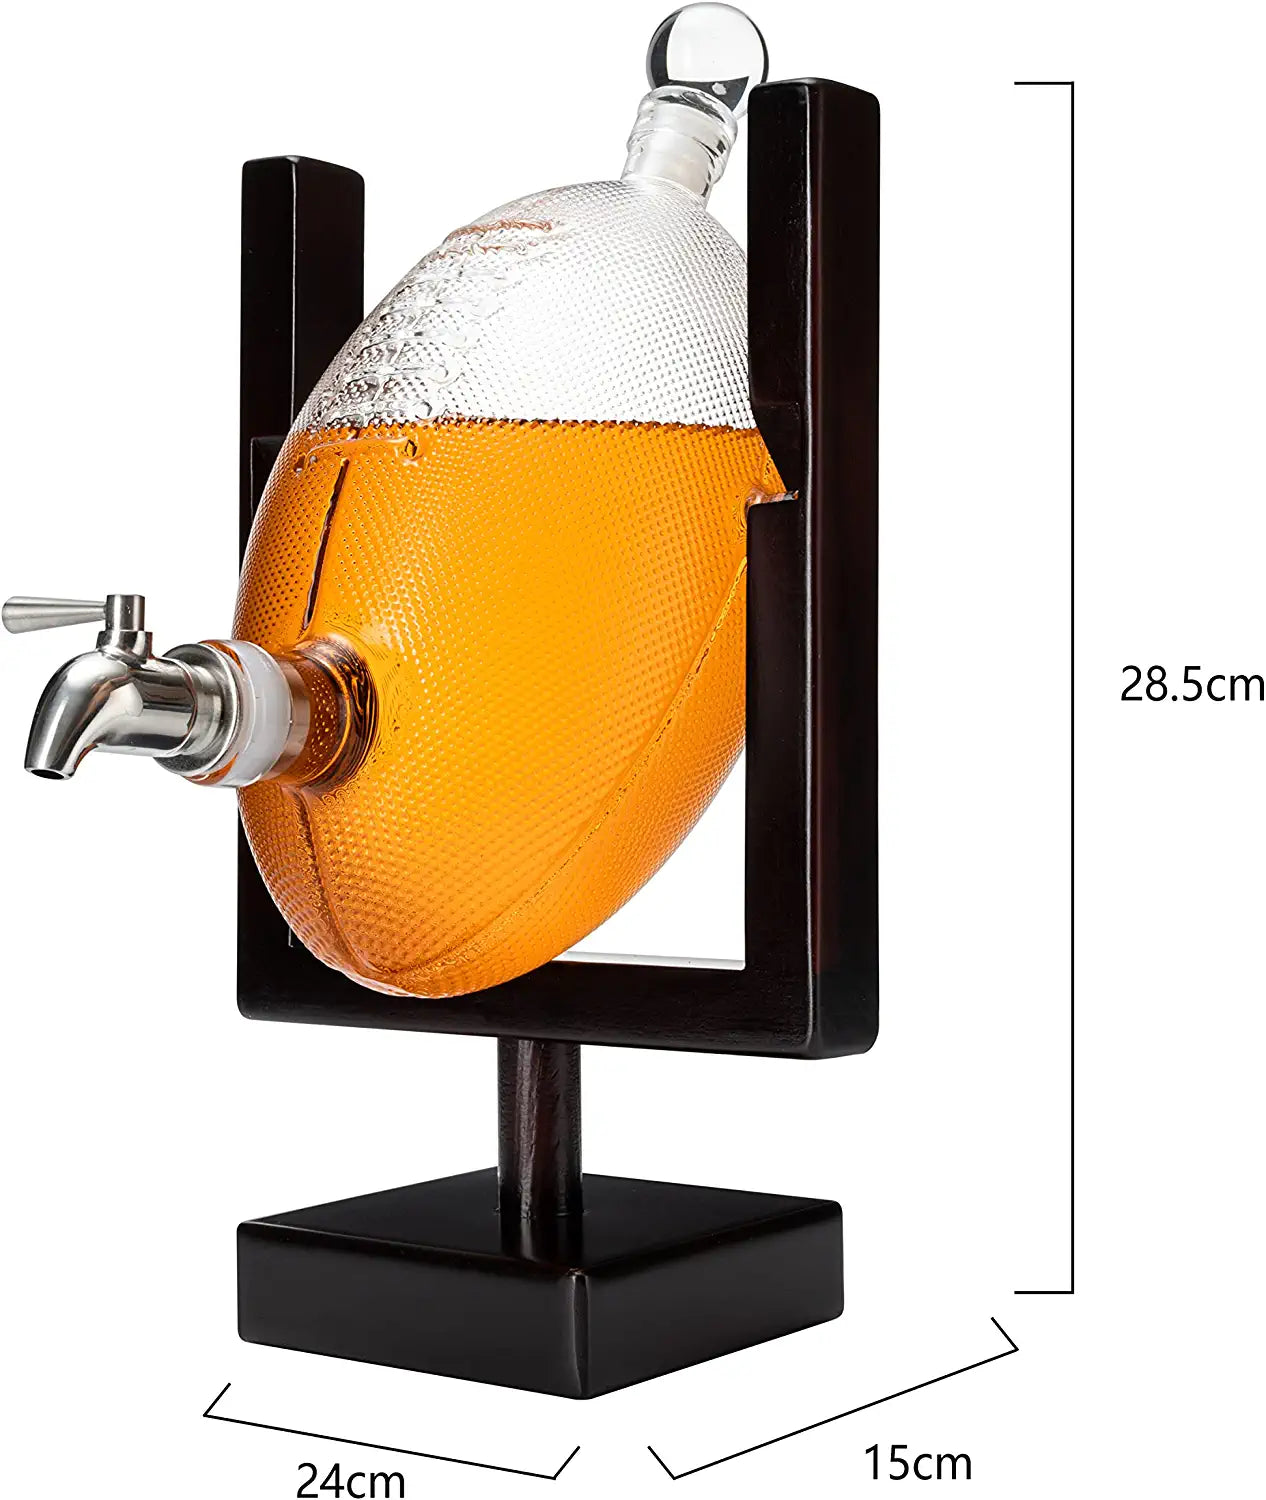 The Wine Savant - Football Decanter for Whiskey, Wine, Water - Spigot Faucet - 1400ml